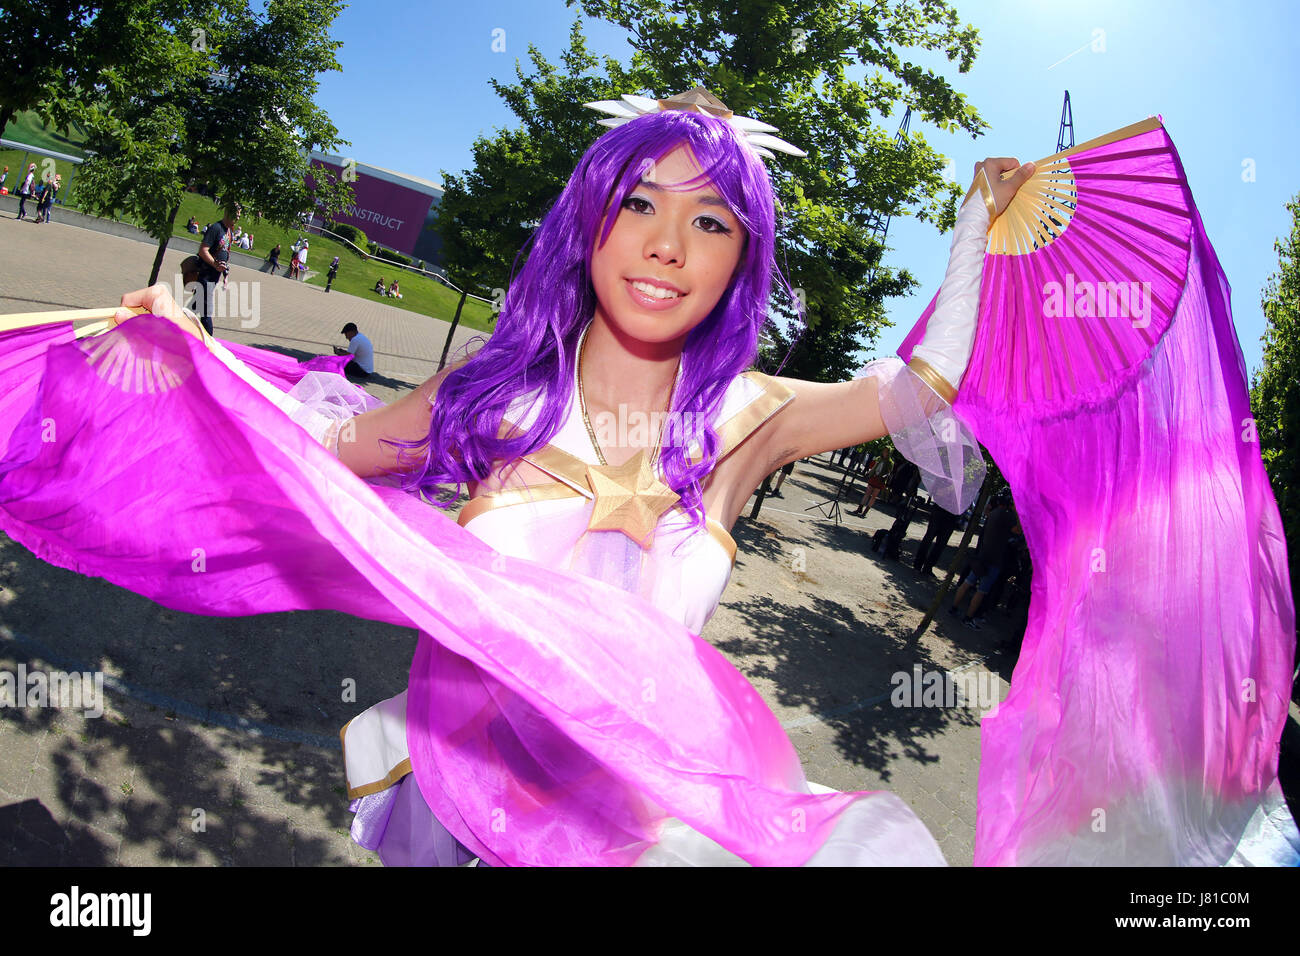 London, UK. 26th May 2017. Janna from League of Legends at the opening day of MCM Comic Con at Excel in London Credit: Paul Brown/Alamy Live News Stock Photo